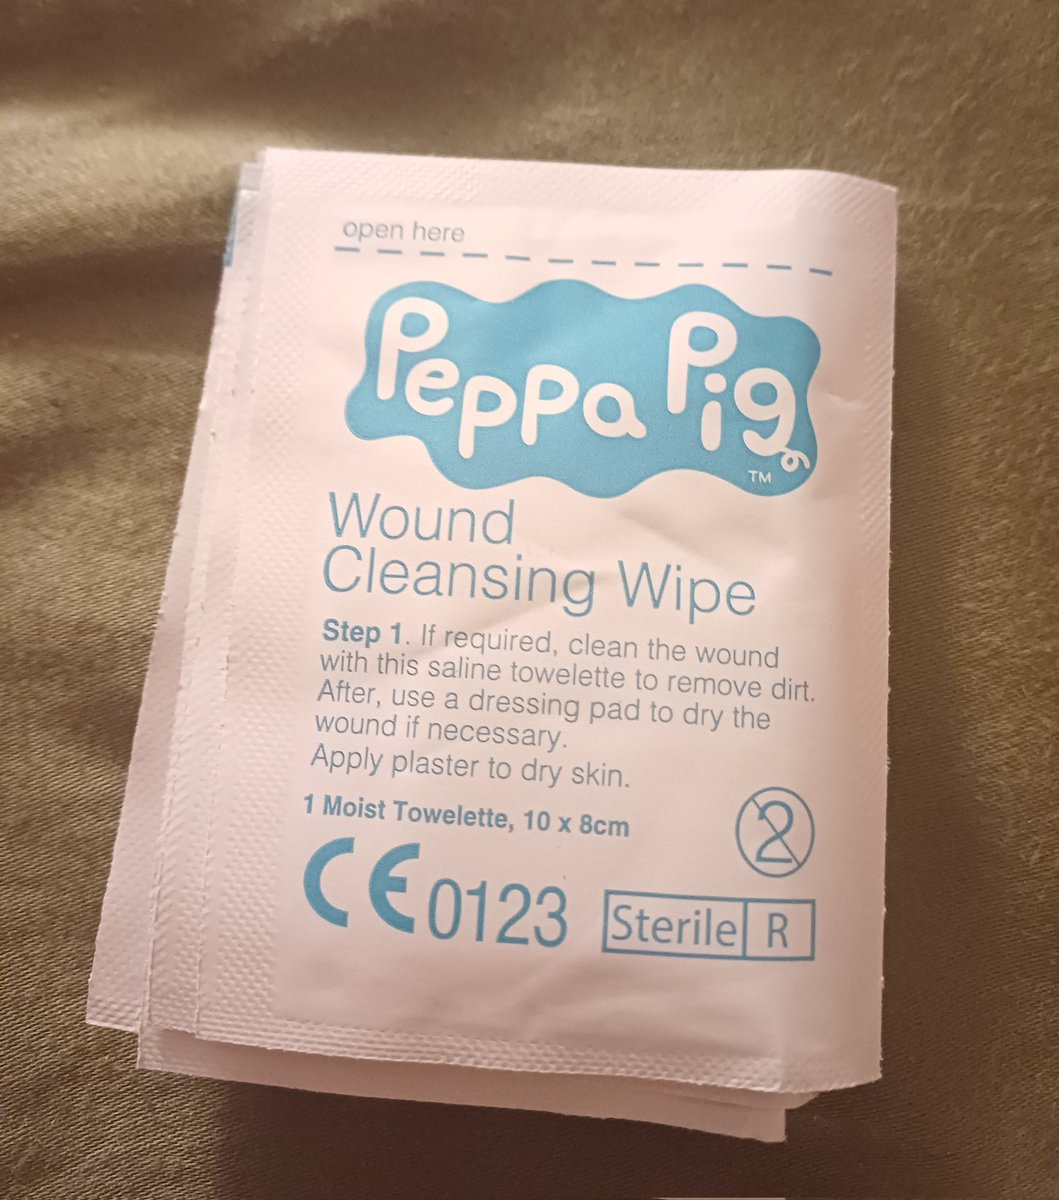 peppa pig wound cleaning wipe tonight king?